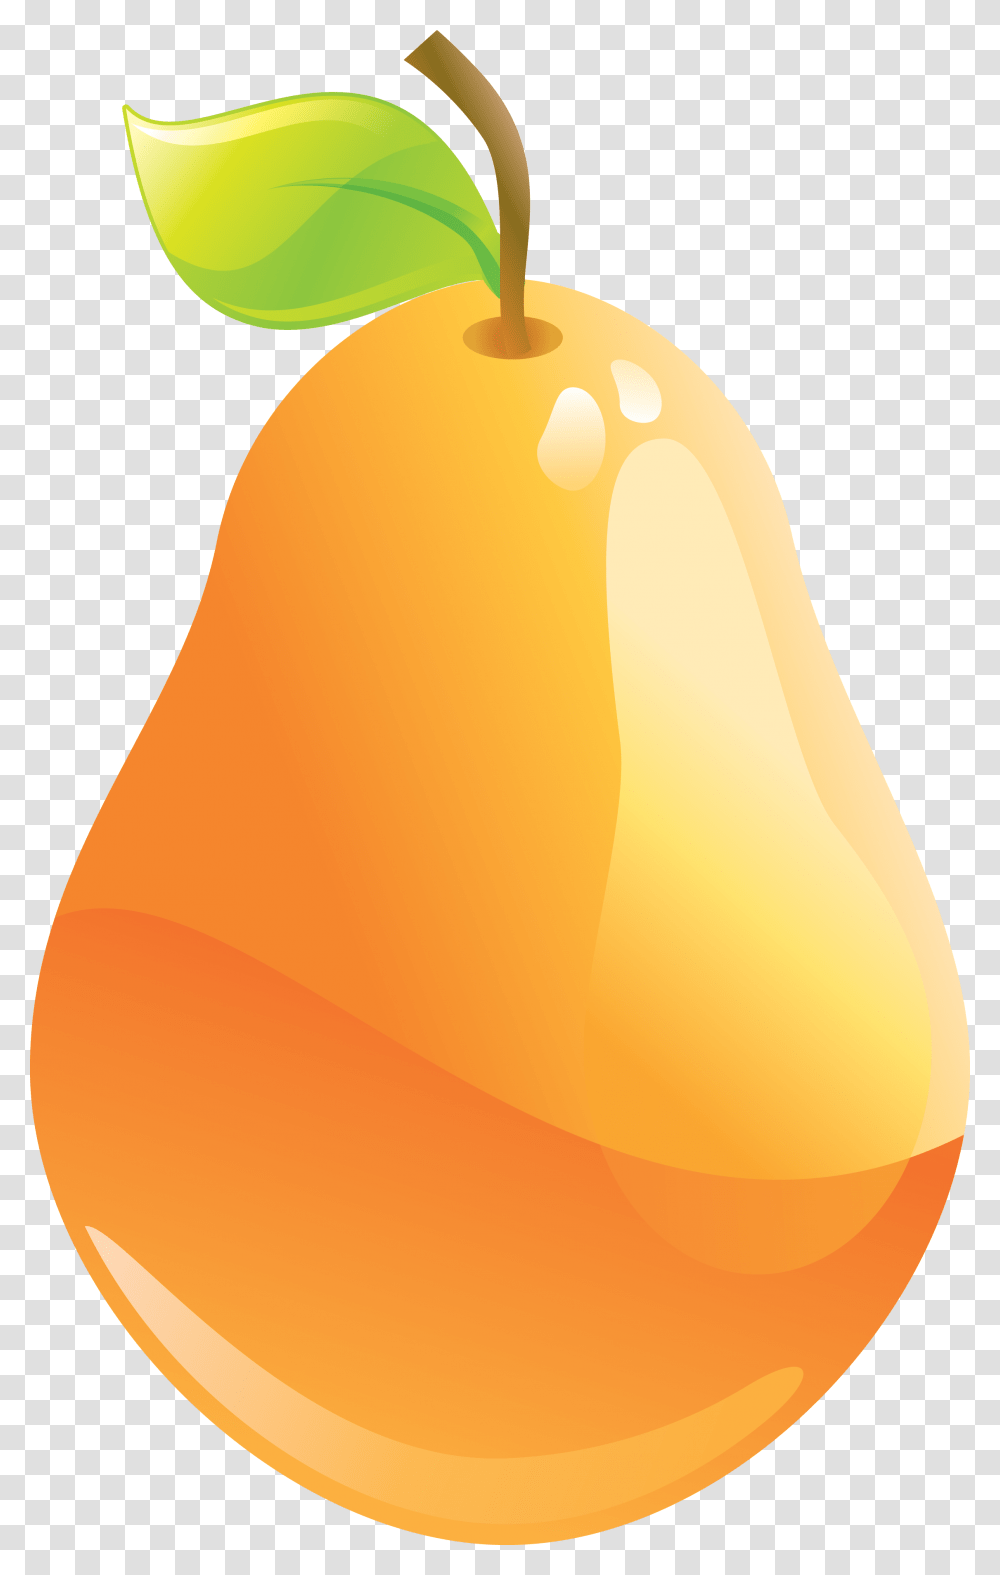 Orange Cantaloupe Hd Best Free Melon Icon Photo Cartoon Fruit And Vegetables, Plant, Food, Produce, Pear Transparent Png